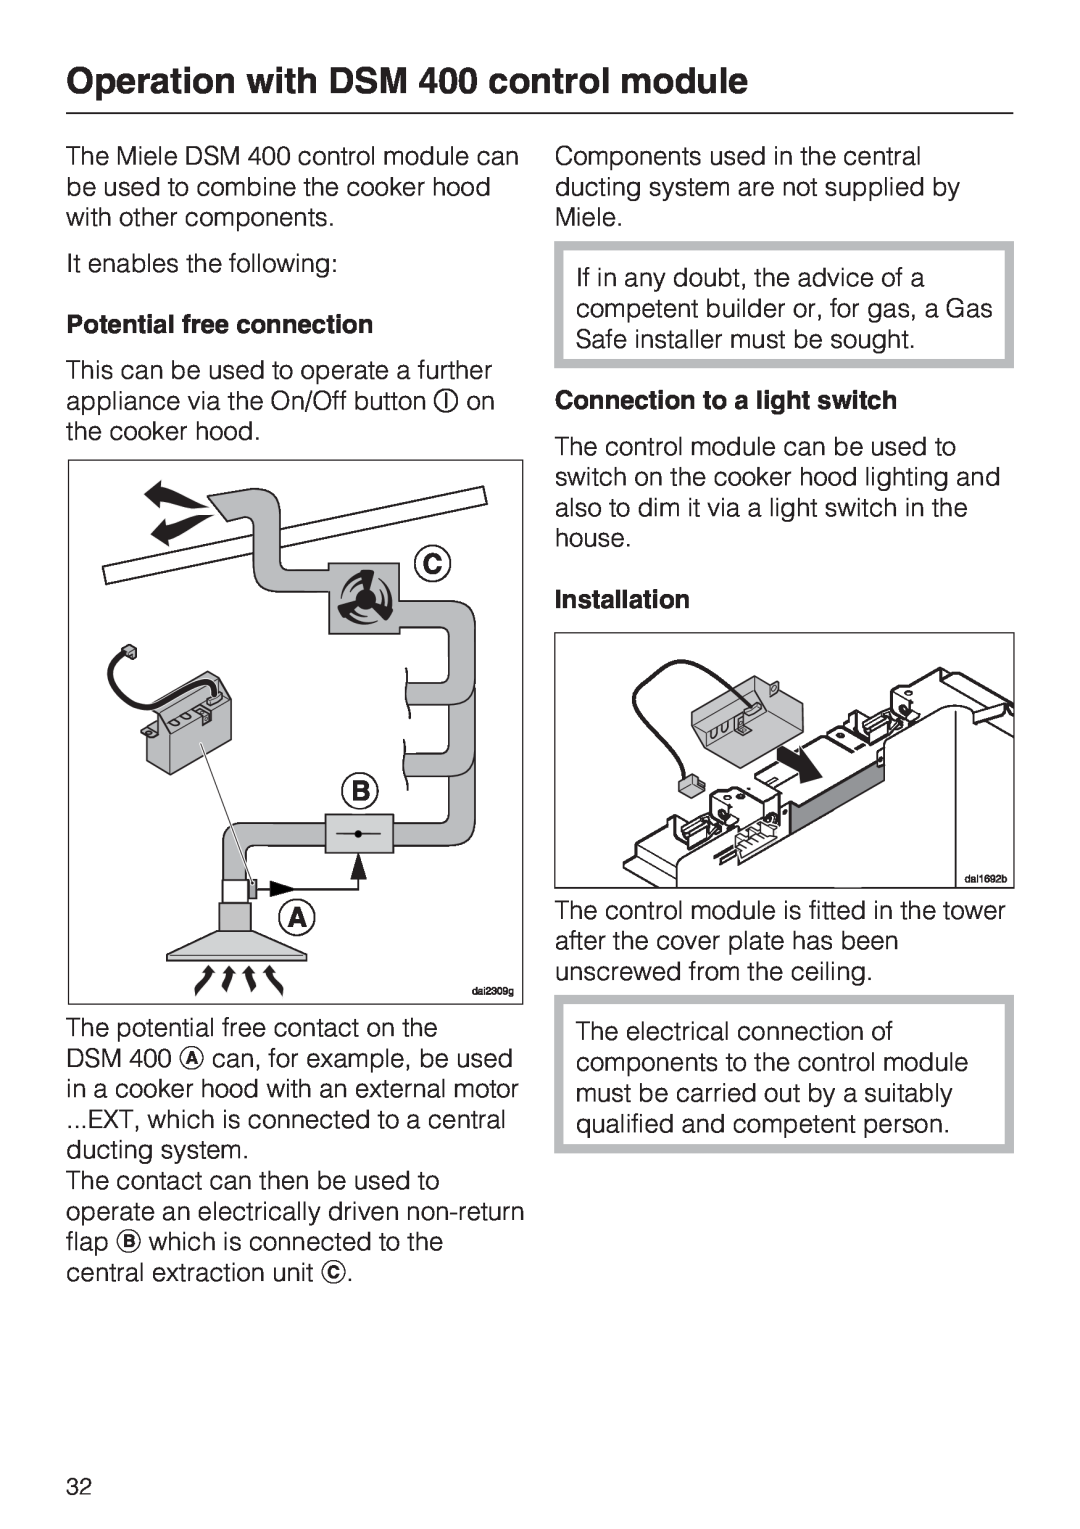 Miele DA 5100 D U Operation with DSM 400 control module, Potential free connection, Connection to a light switch 